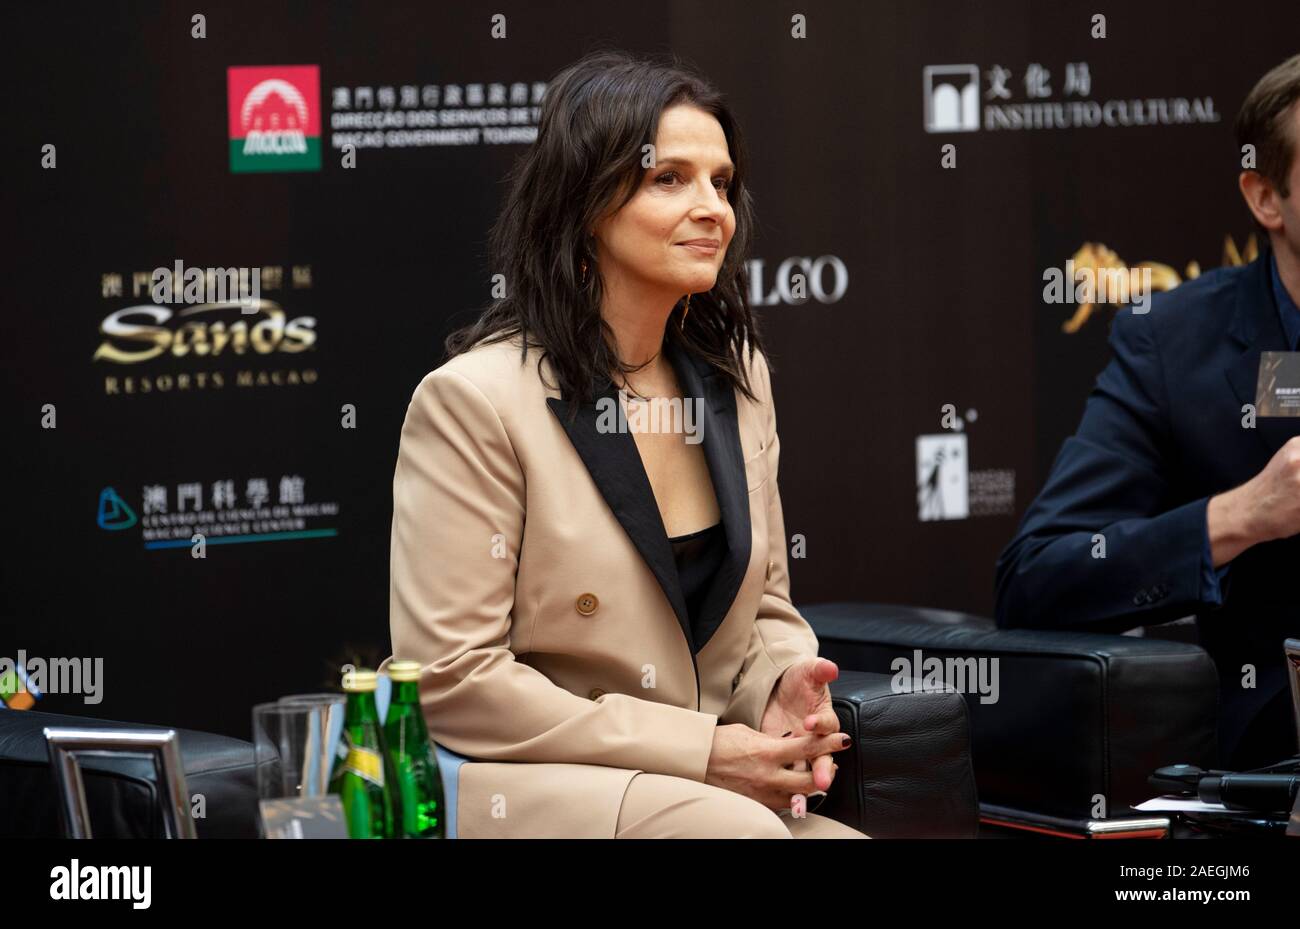 French actress, Juliette Binoche talks about her films at a meet the press session for IFFAM 2019 Stock Photo